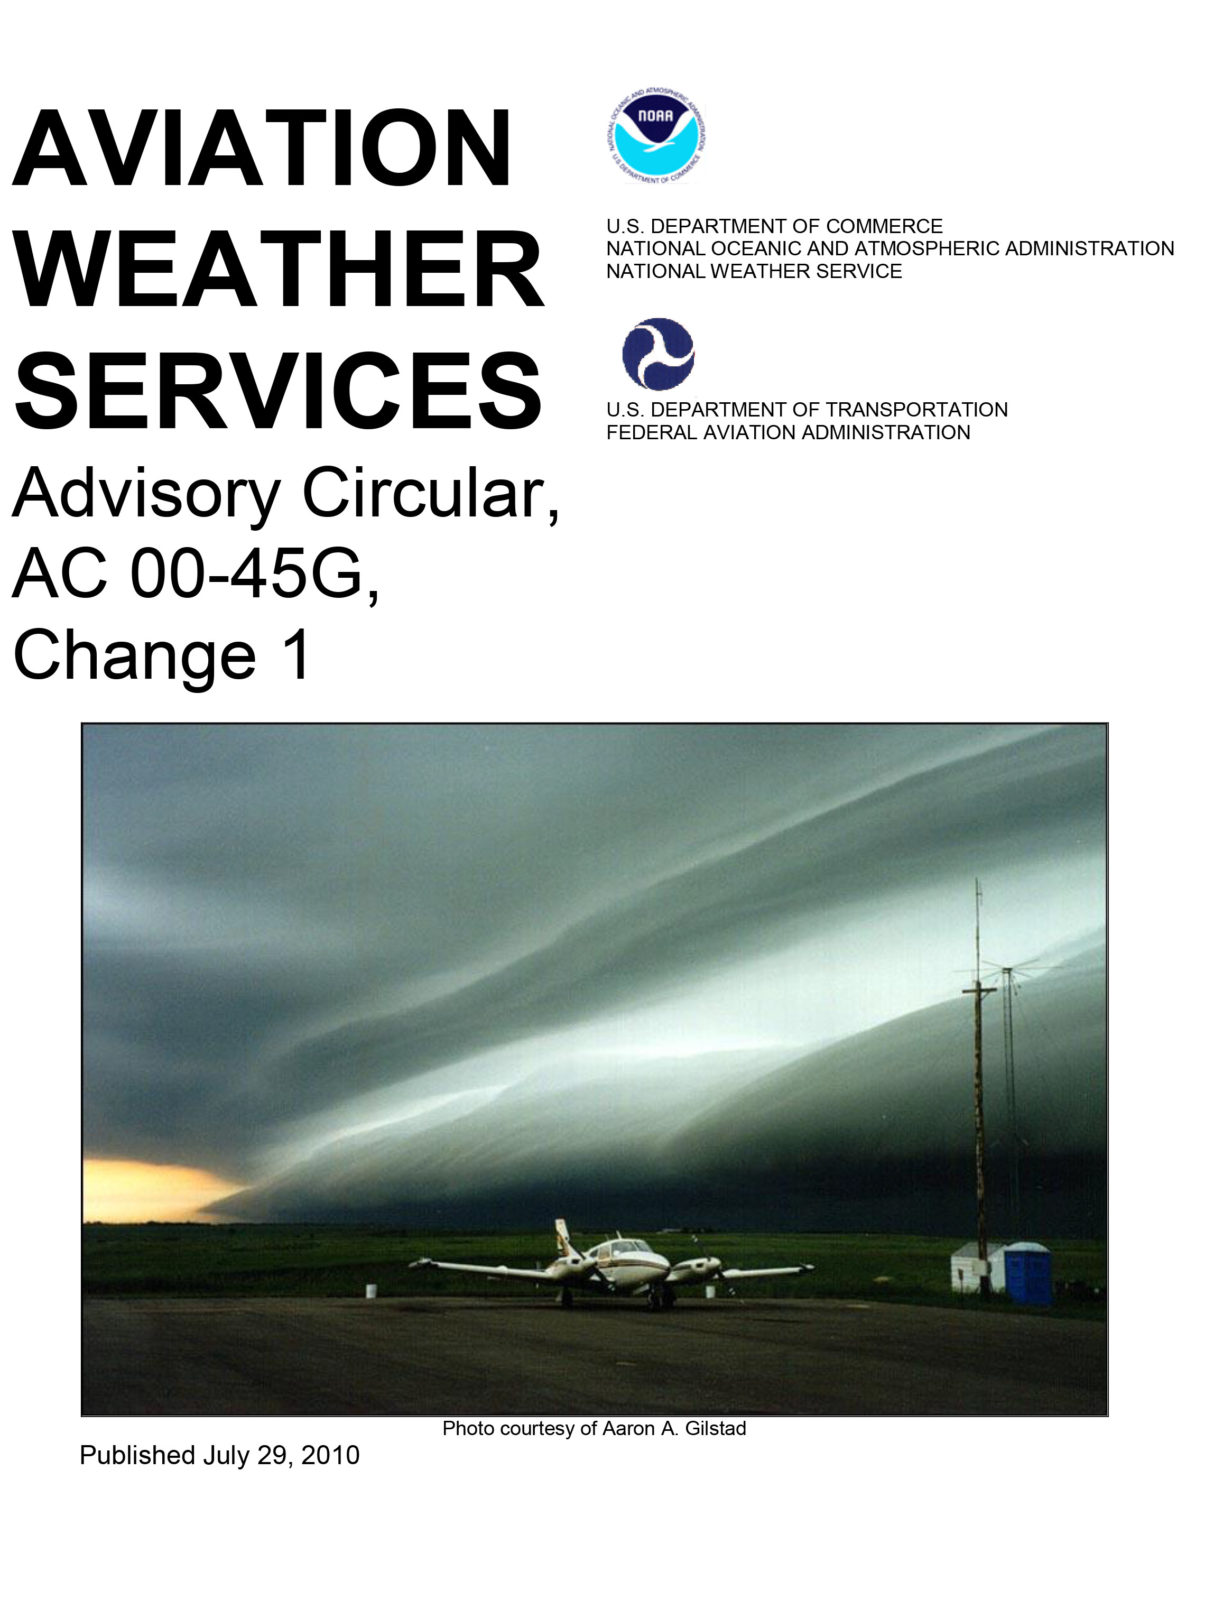 Aviation Weather Services